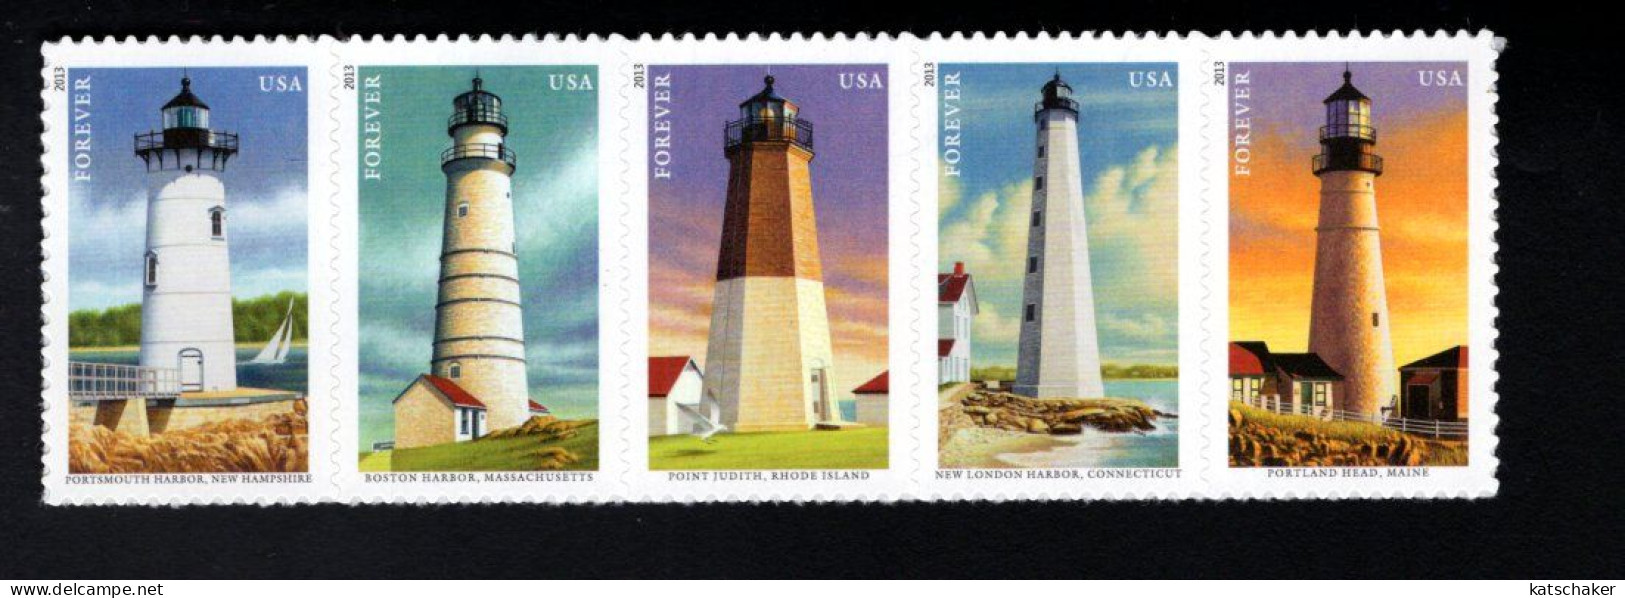 1738943655 2013  (XX) SCOTT 4795A POSTFRIS MINT NEVER HINGED - LIGHTHOUSES 4792FIRST STAMP OF STRIP - Nuevos